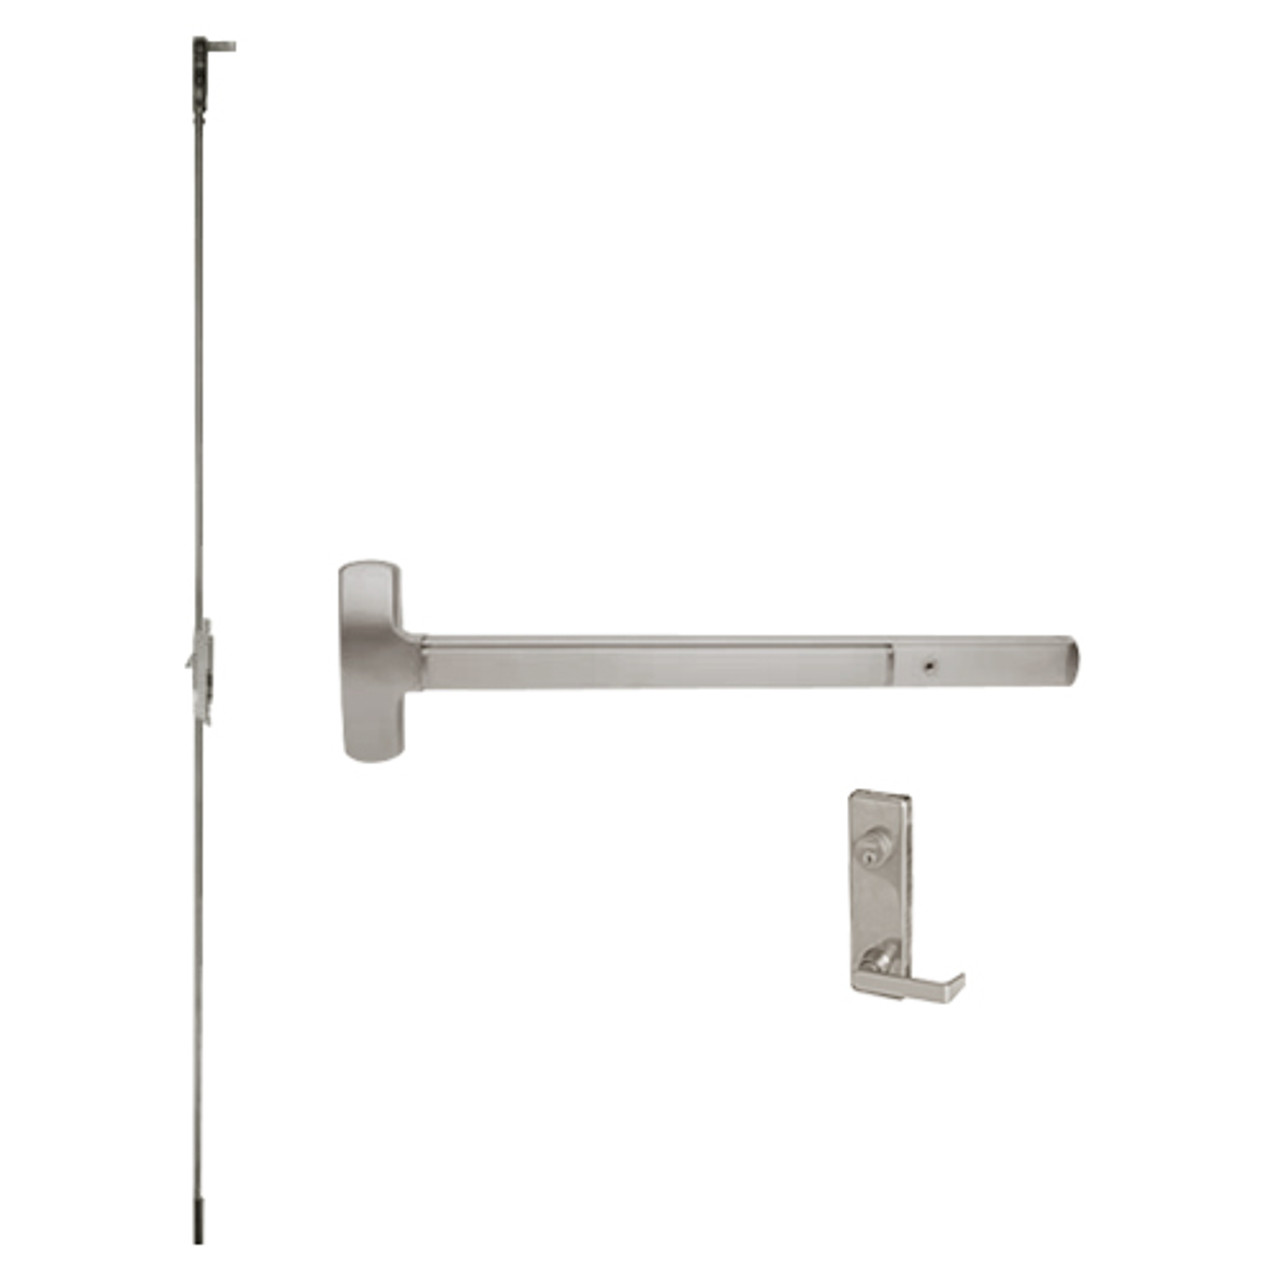 25-C-L-NL-DANE-US32D-3-LHR Falcon Exit Device in Satin Stainless Steel